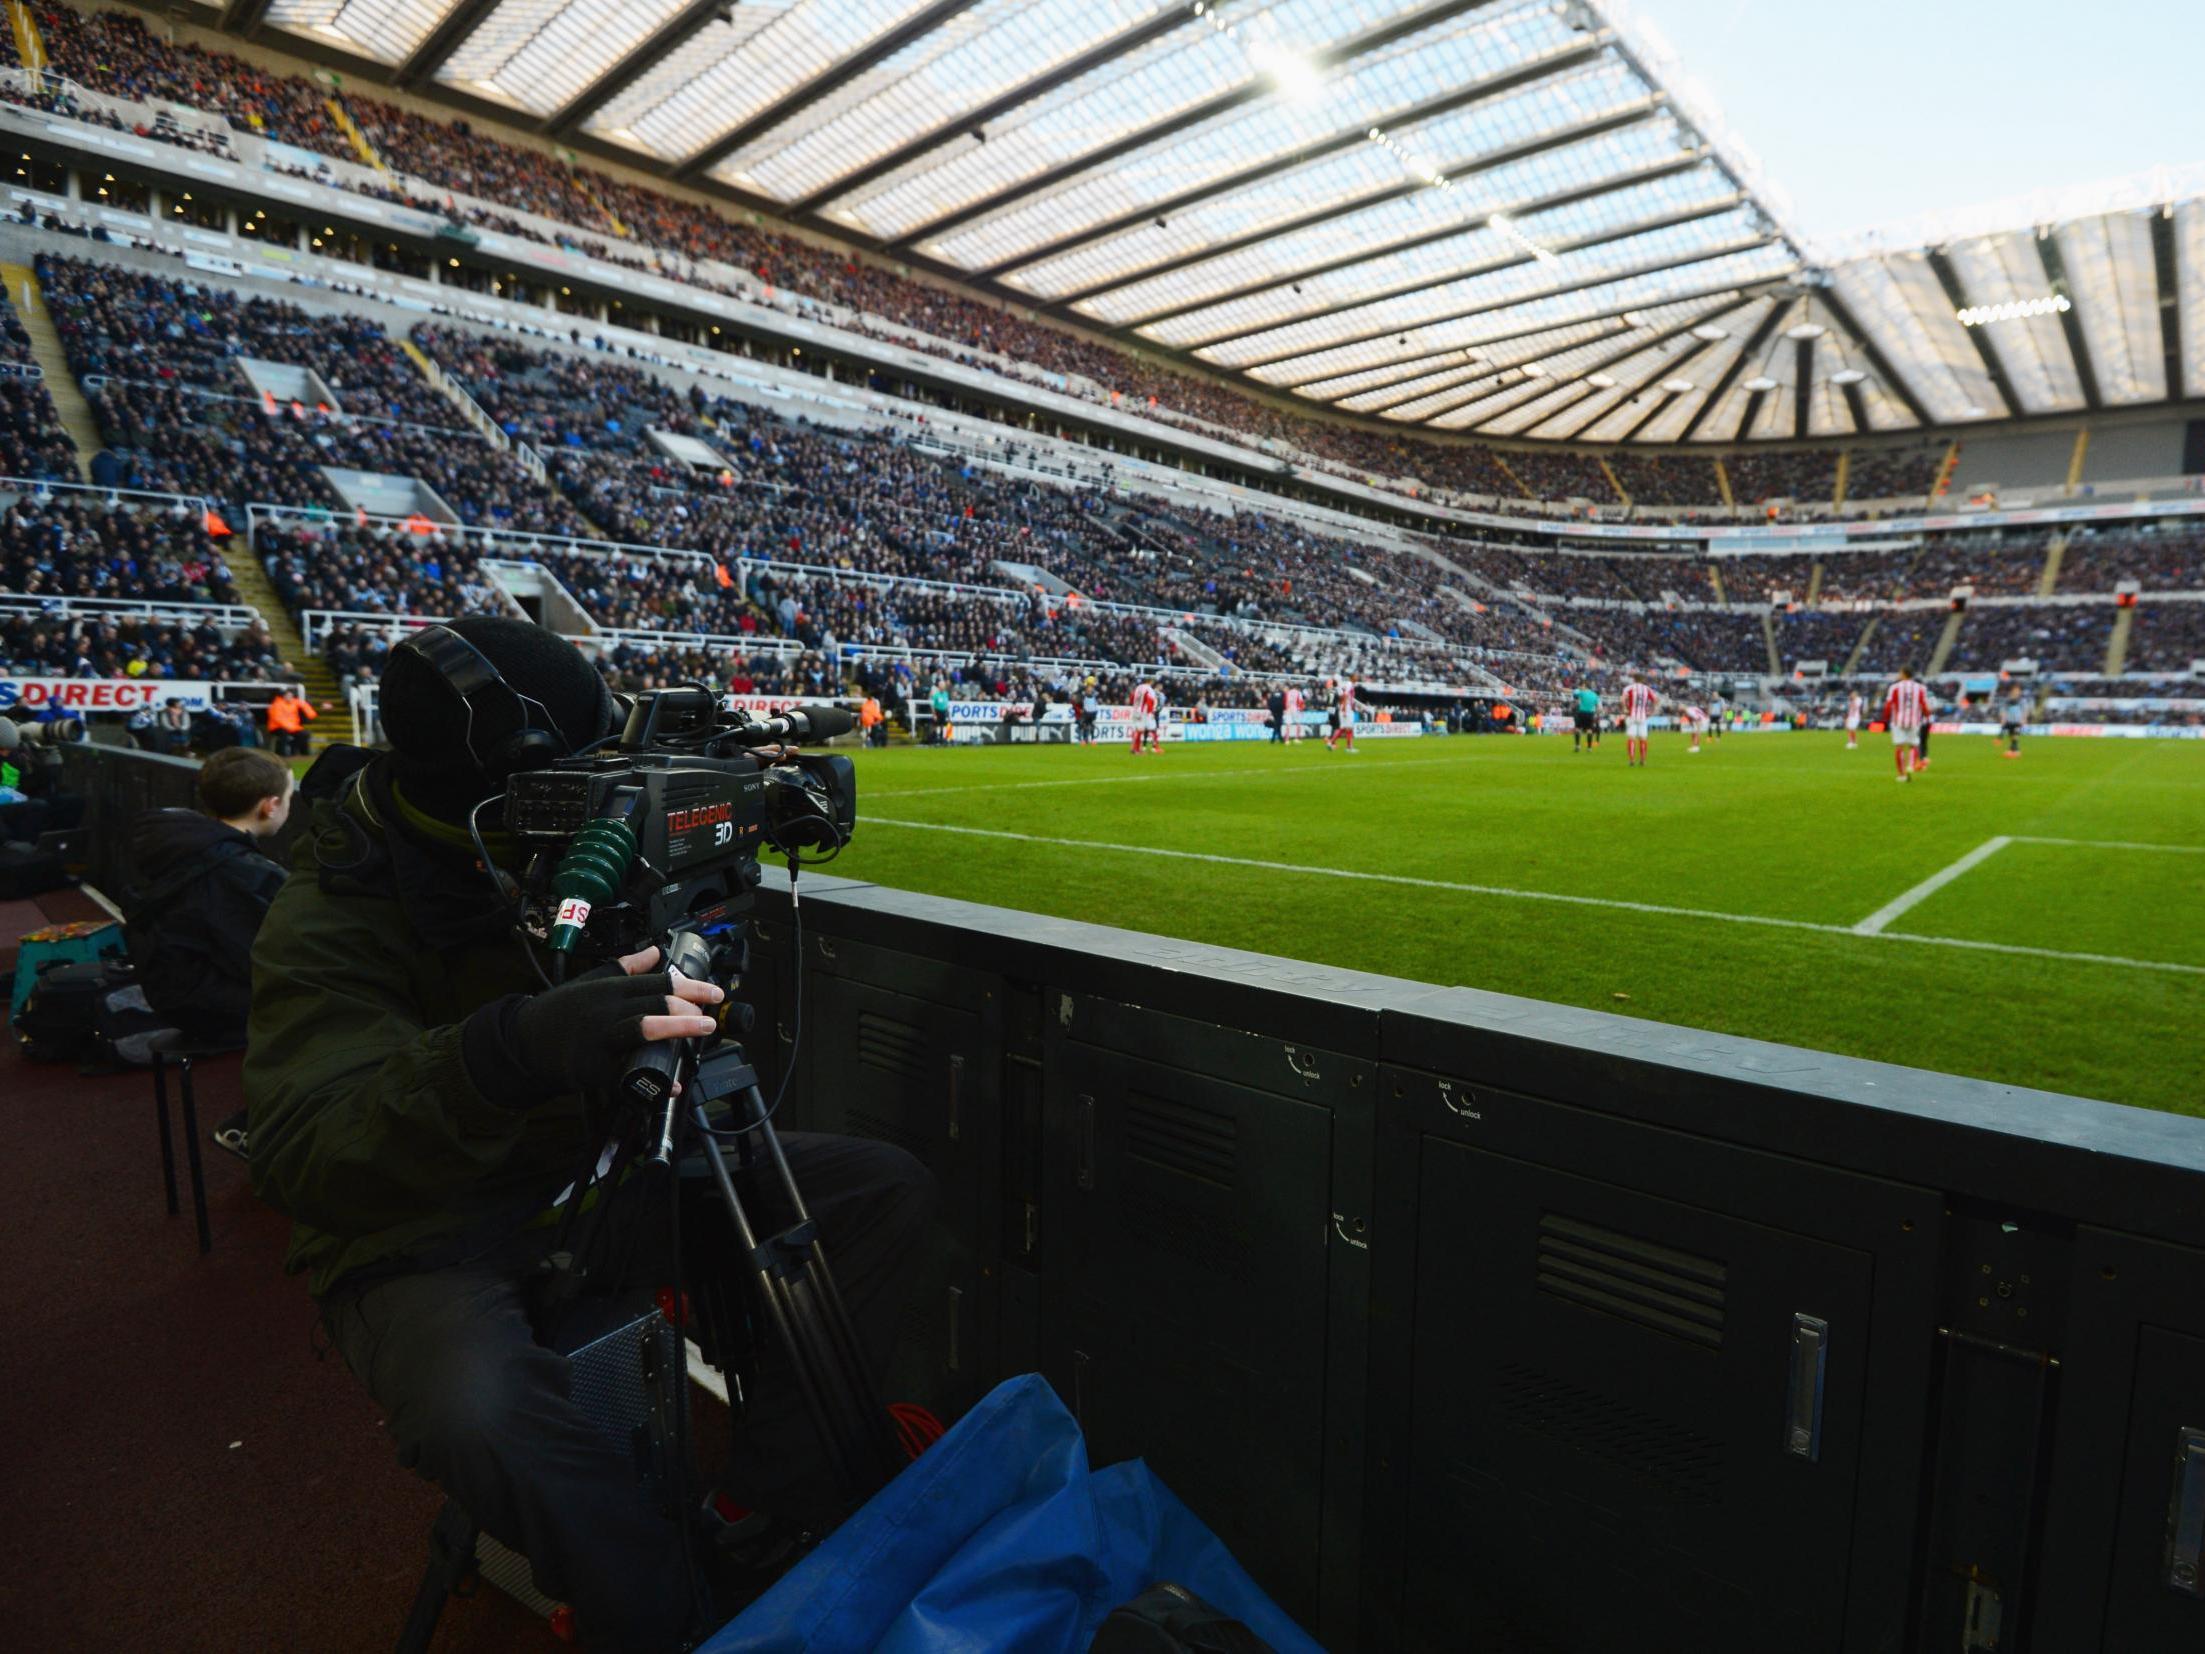 A consortium backed by Saudi Arabia's Public Investment Fund is on the verge of completing a £300m takeover of Newcastle United